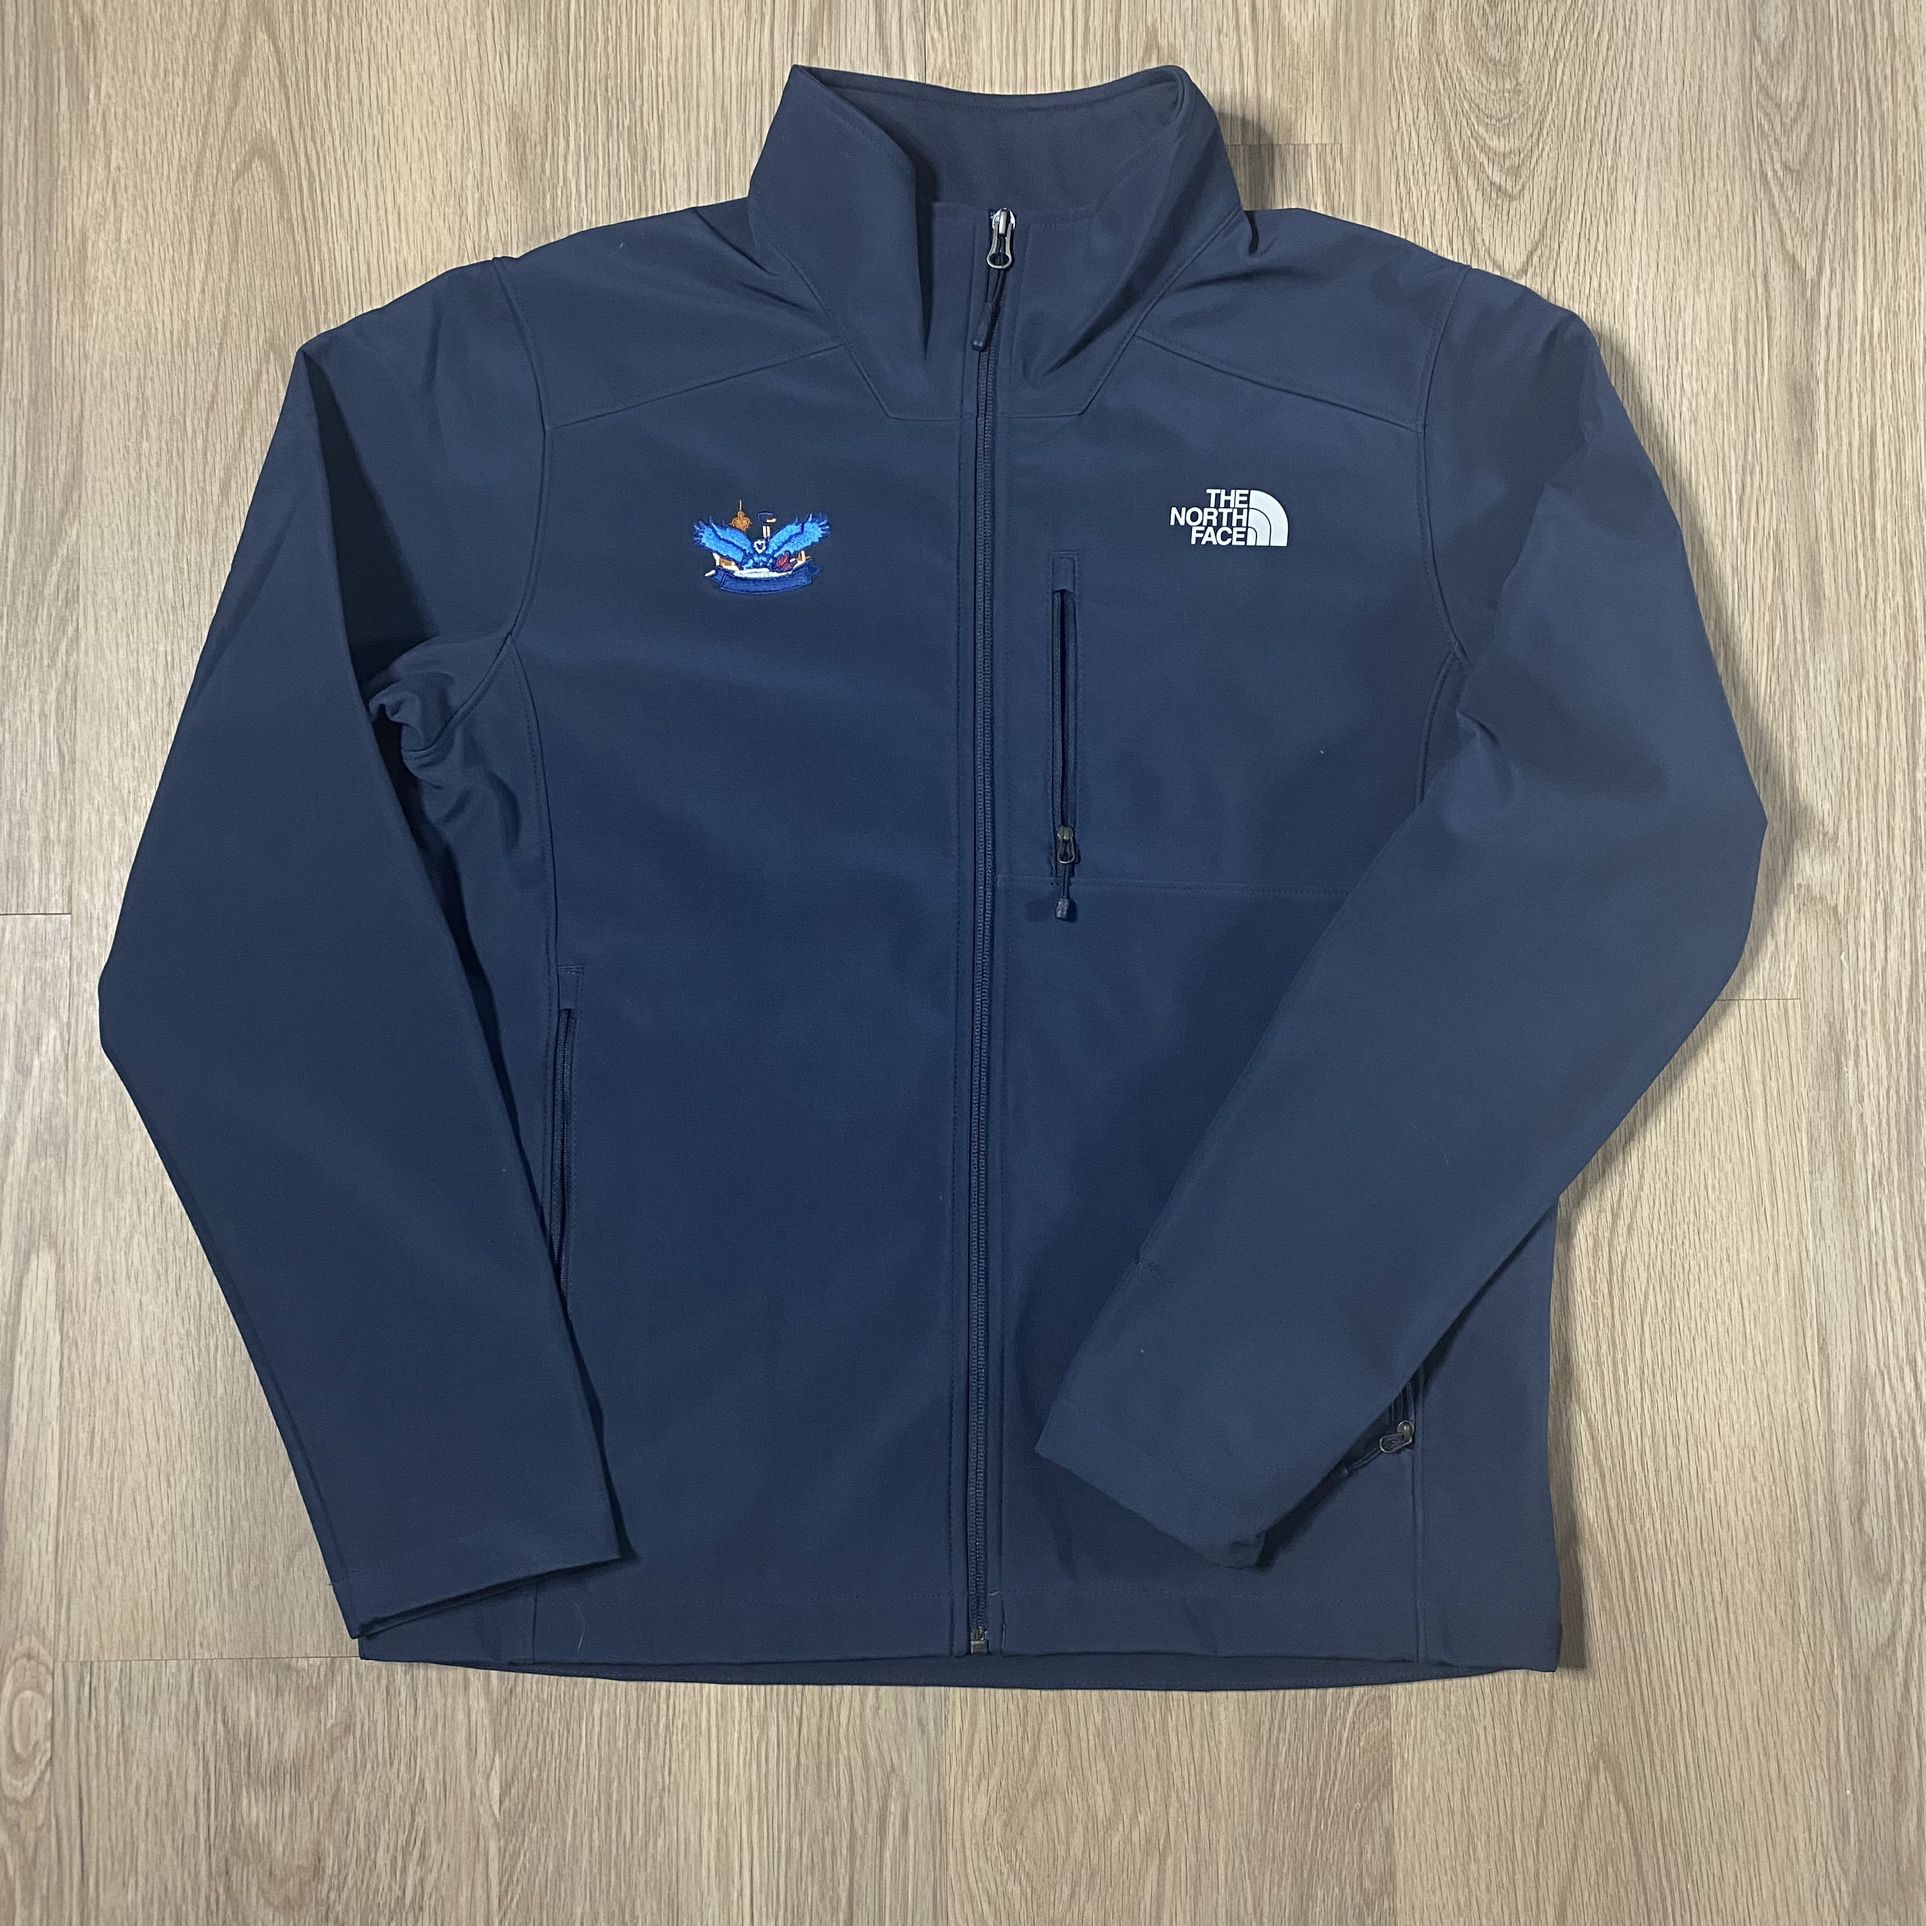 The North Face Navy Blue Zip Up Embroidered Jacket Size Mens Medium